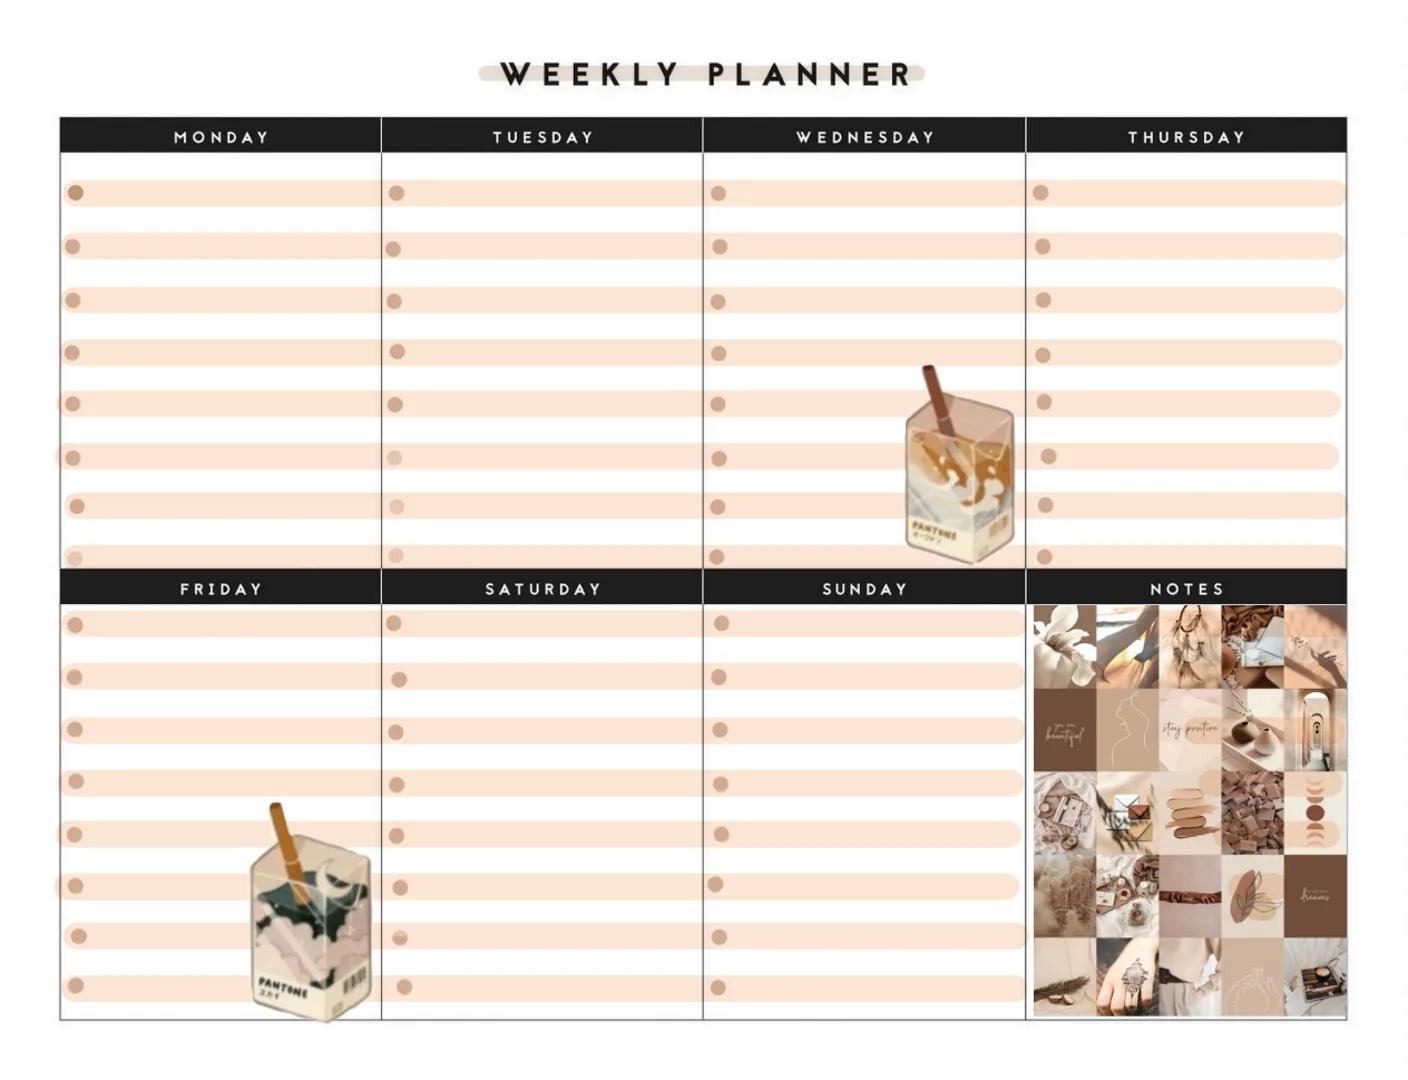 MONDAY
FRIDAY
POLTONE
WEEKLY PLANNER
TUESDAY
SATURDAY
WEDNESDAY
SUNDAY
PANTONE
3
beautiful
THURSDAY
NOTES
키
stay positive
DO(
kwam